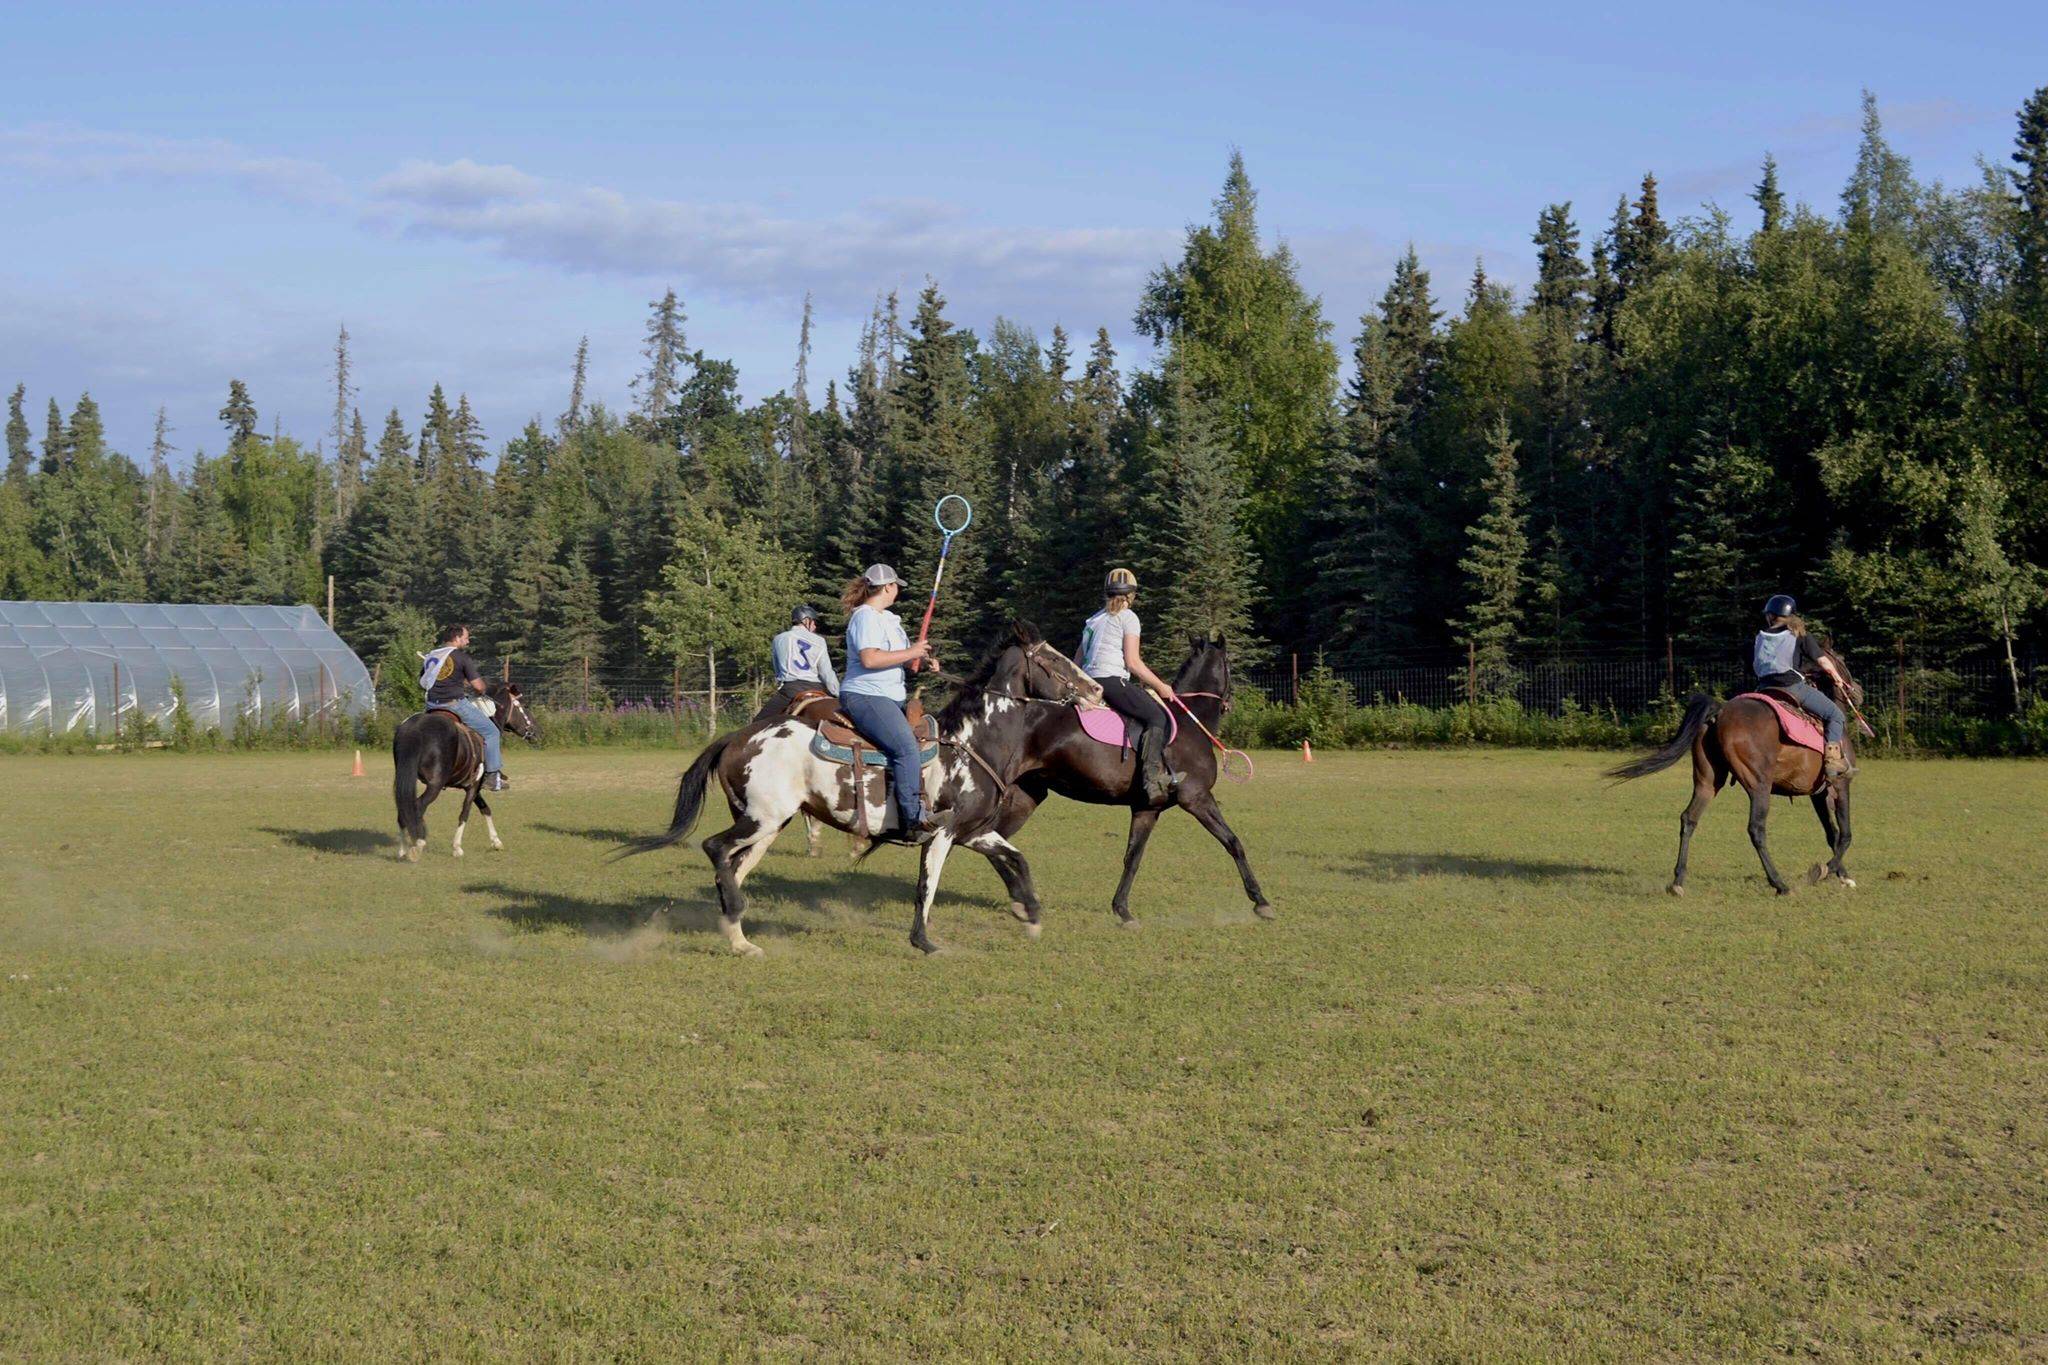 A group of riders engage in a game of polocrosse, a sport combining rules of polo and lacrosse, Thursday, July, 25, 2019 near Soldotna, Alaska. (Photo by Victoria Petersen/Peninsula Clarion)